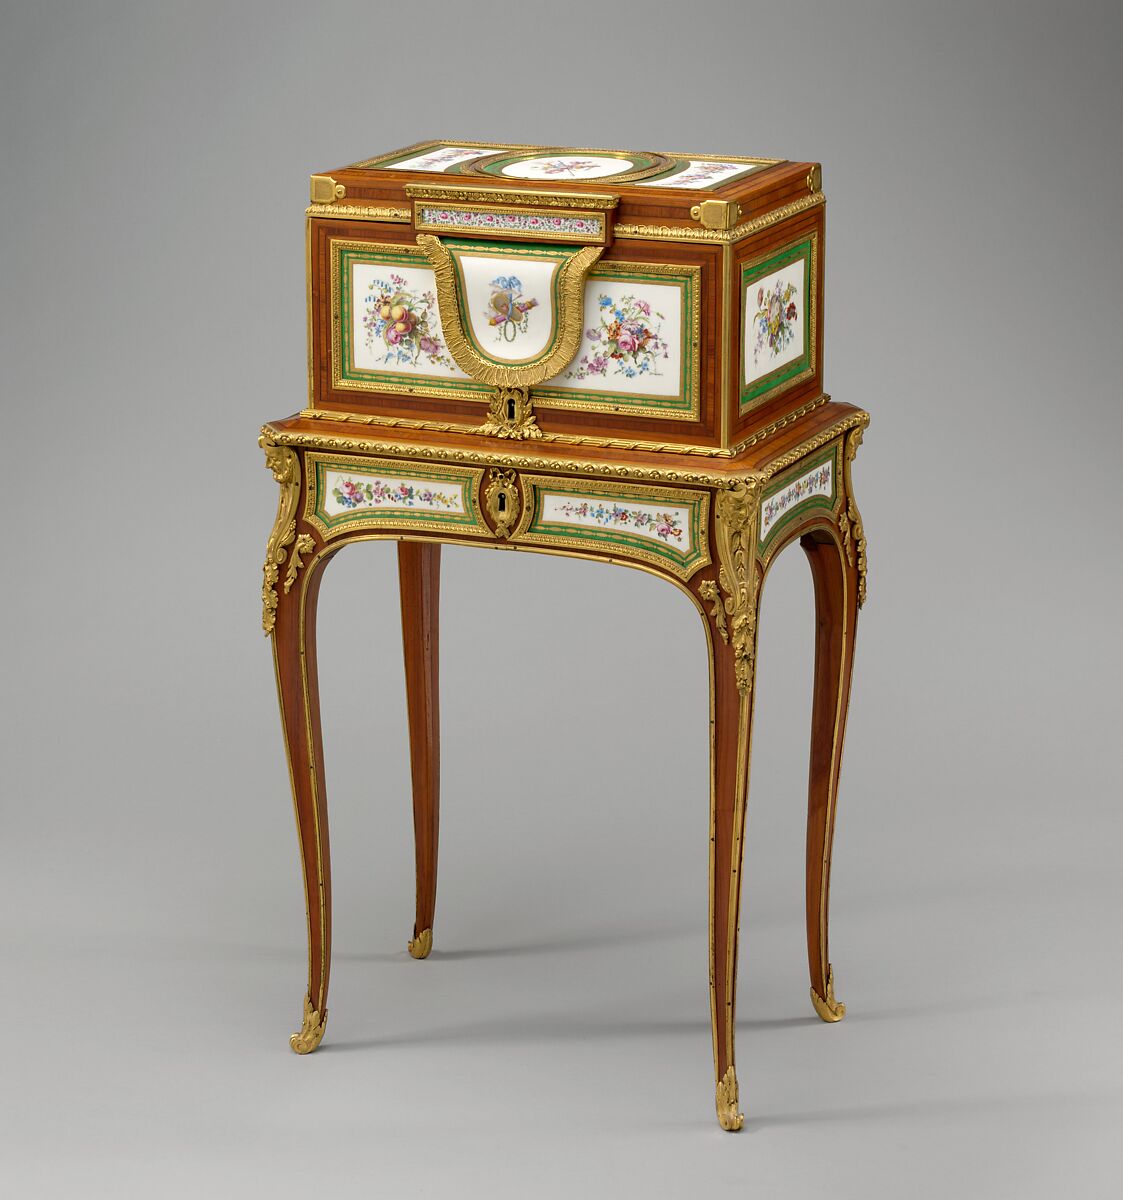 Jewel coffer on stand (petit coffre à bijoux), Coffer attributed to Martin Carlin (French, near Freiburg im Breisgau ca. 1730–1785 Paris), Oak veneered with tulipwood, amaranth, stained sycamore, holly, and ebonized holly; thirteen soft-paste porcelain plaques; gilt-bronze mounts; velvet (not original), French, Paris and Sèvres 